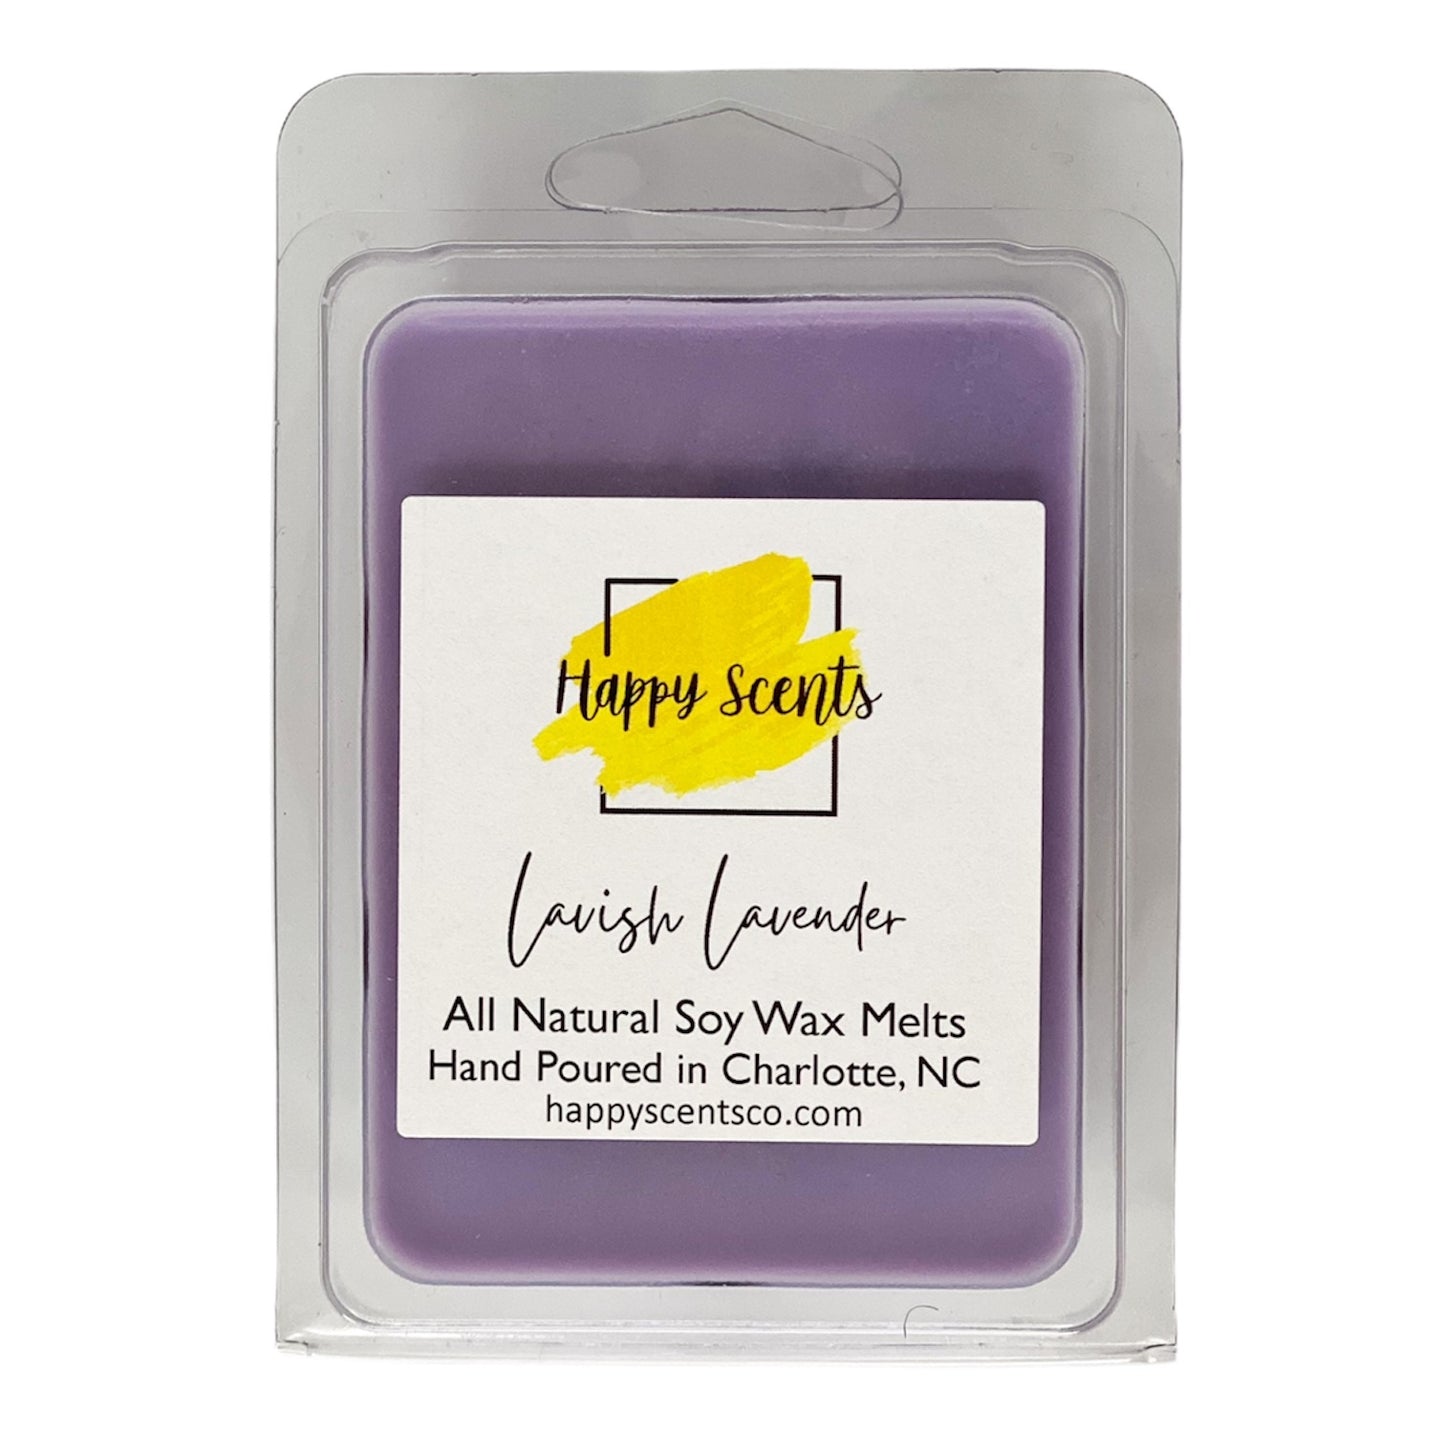 Lavender scented wax melts in a clamshell container. Wax melts break into 6 pieces